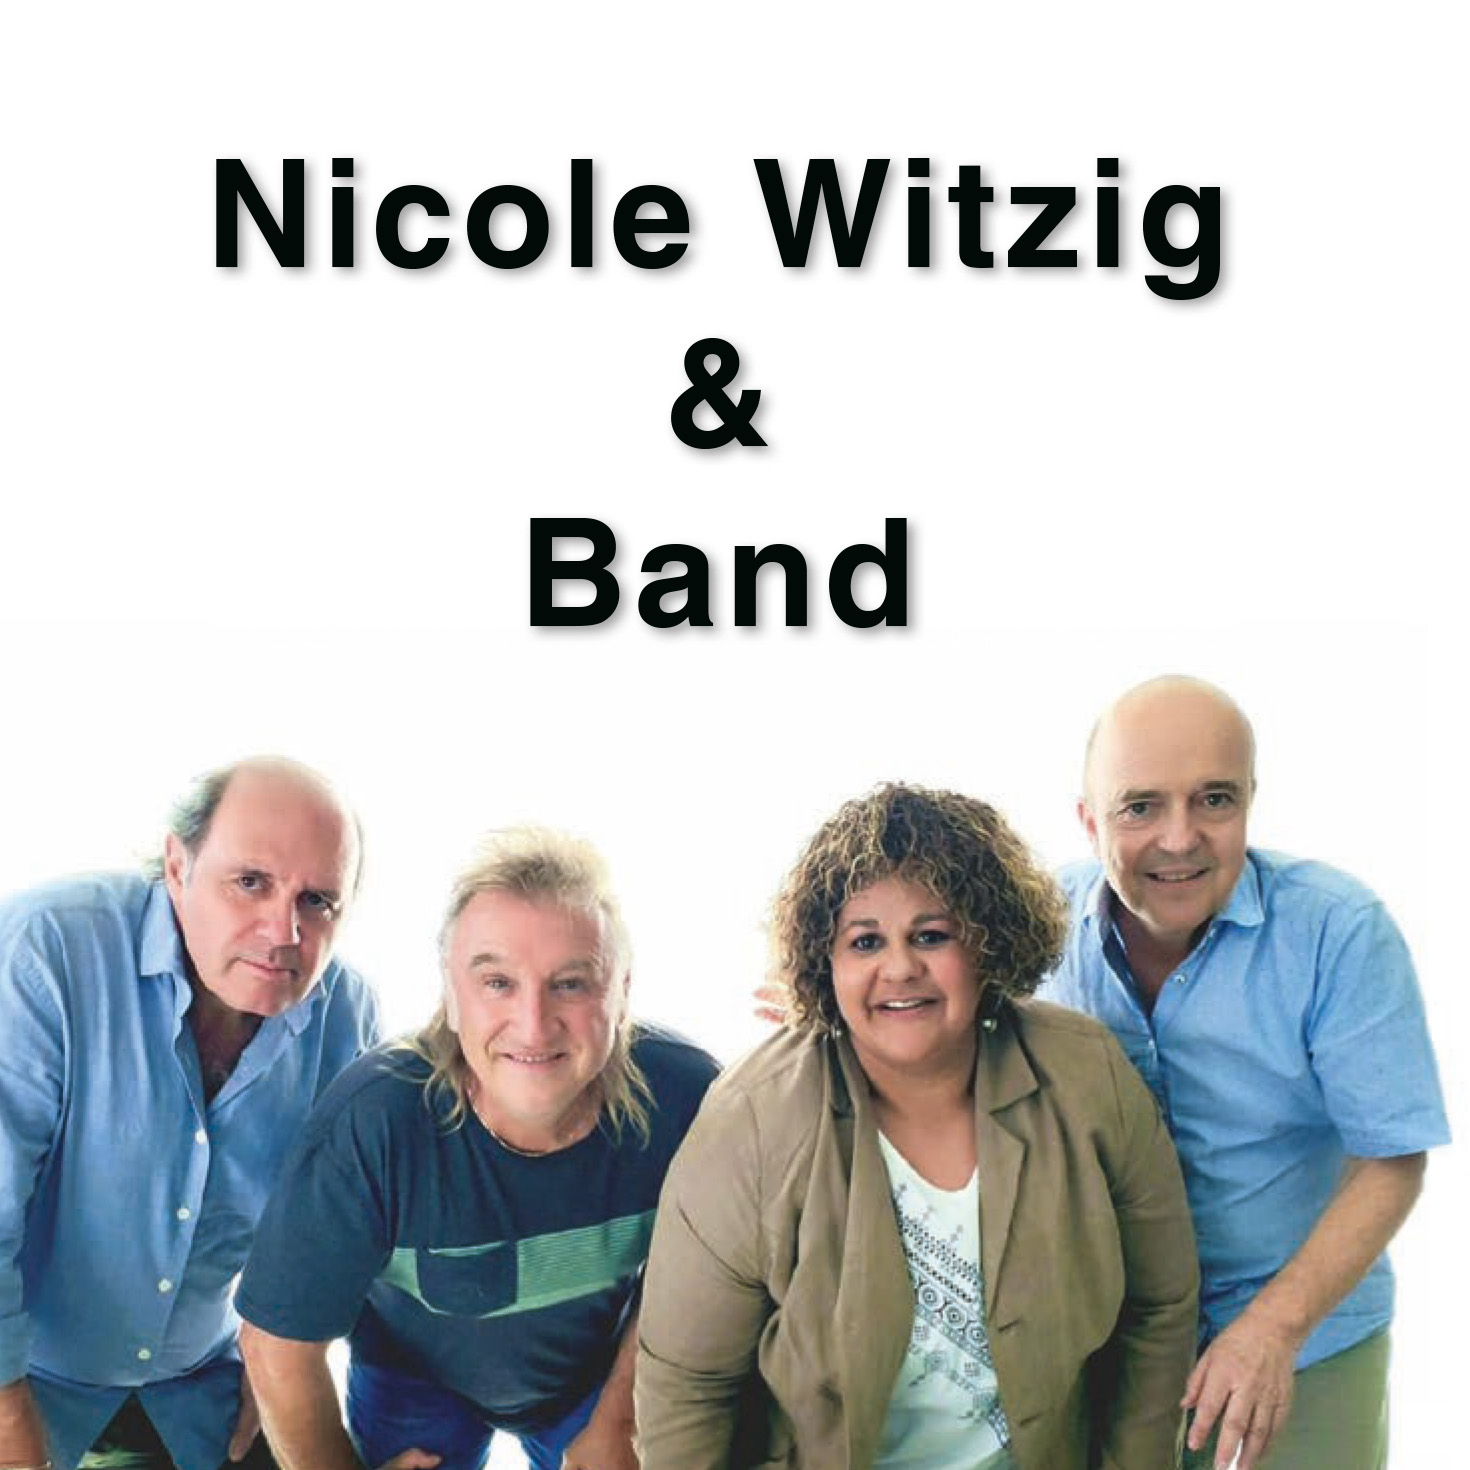 Witzig & Band CD-Cover